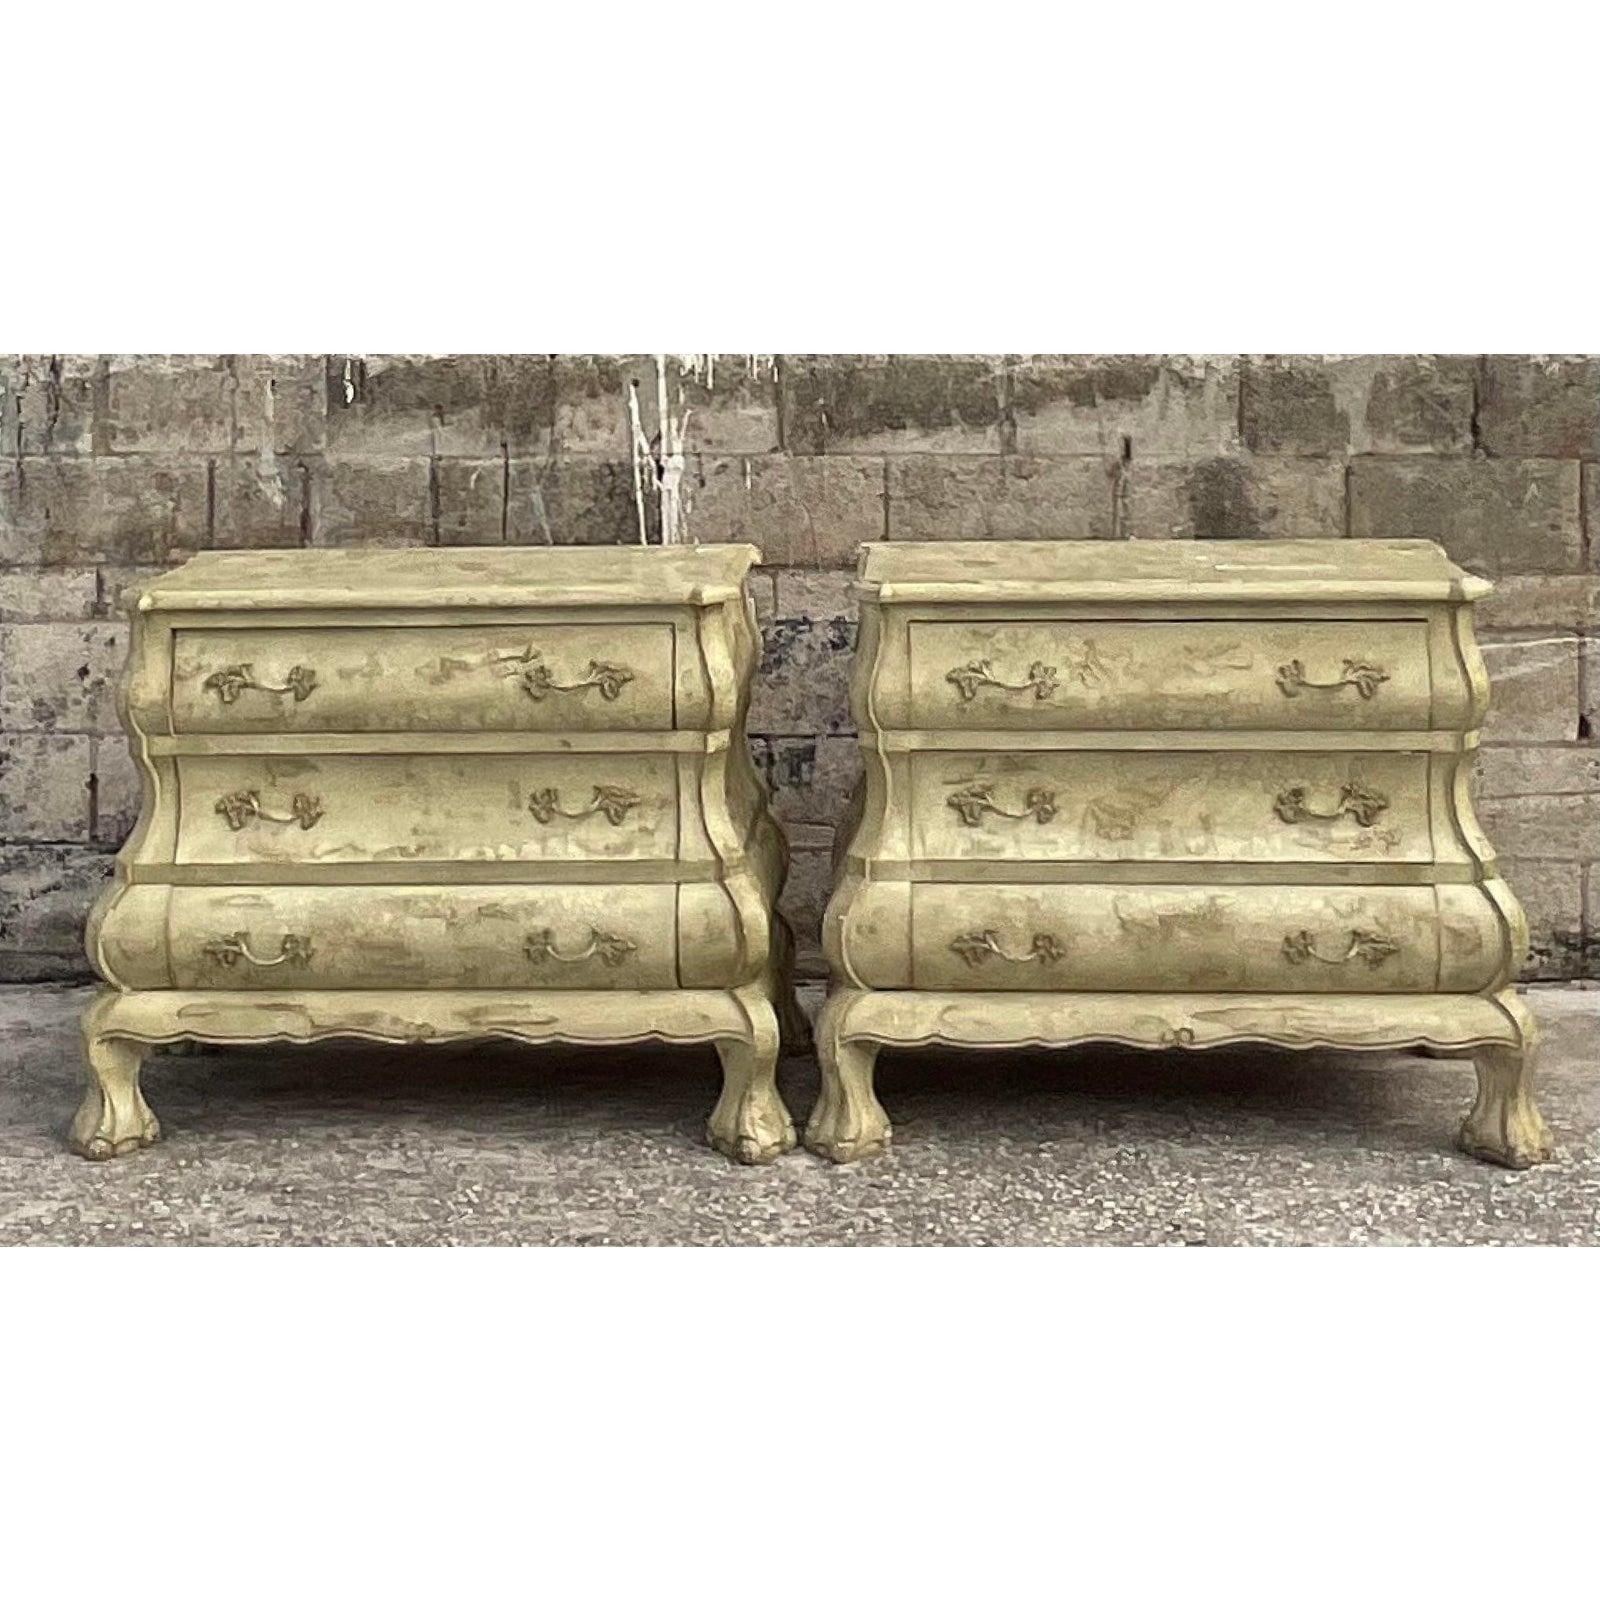 French Provincial Vintage French Ball and Claw Bombe Chests of Drawers - a Pair For Sale